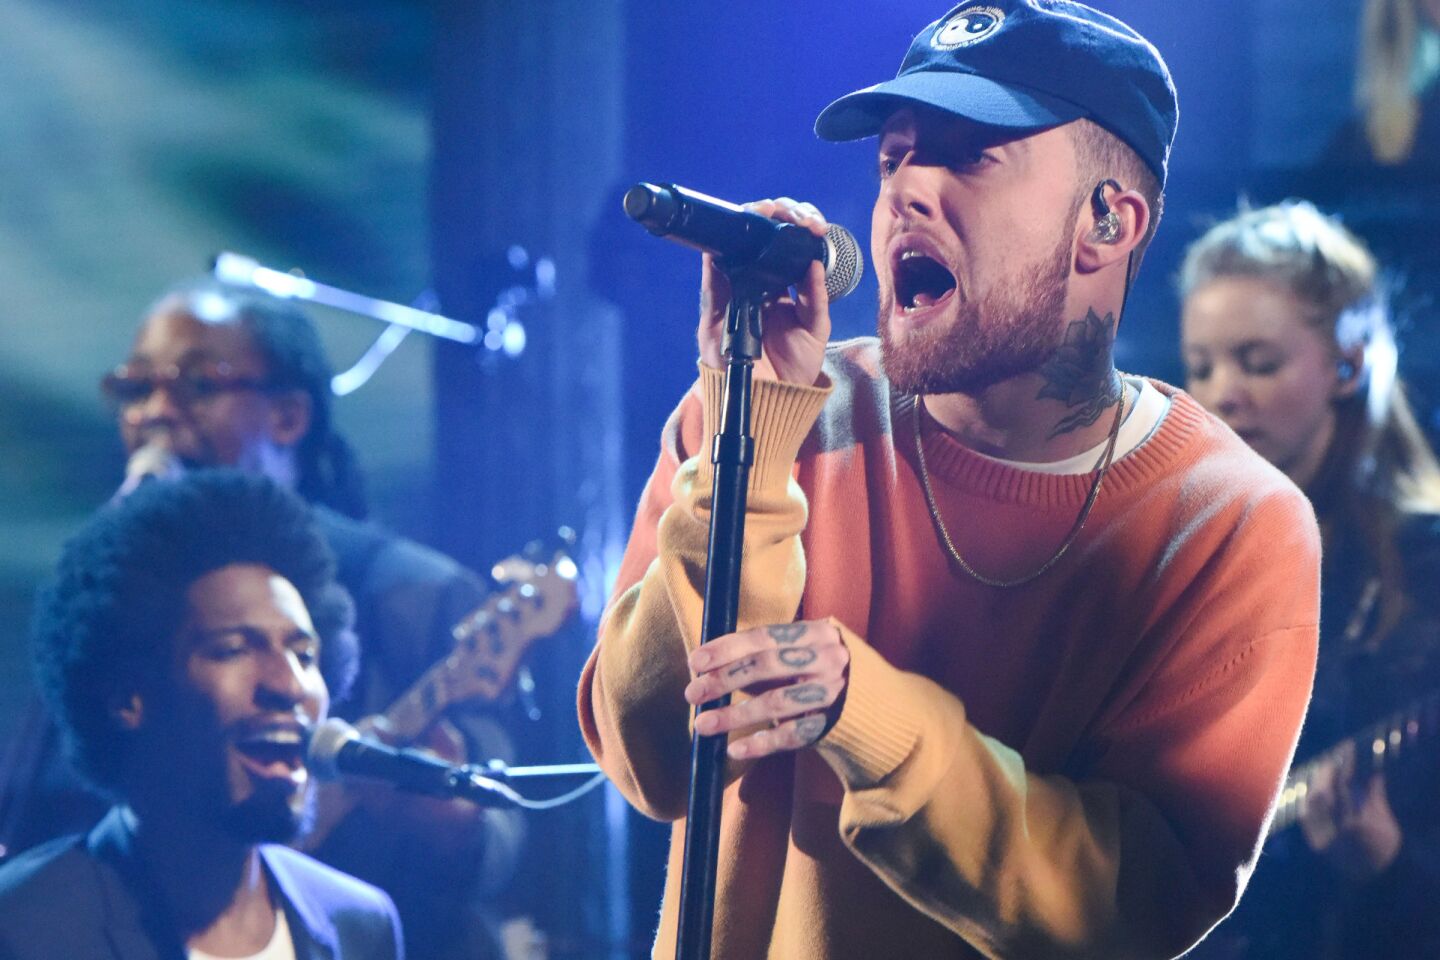 Mac Miller: Life in pictures